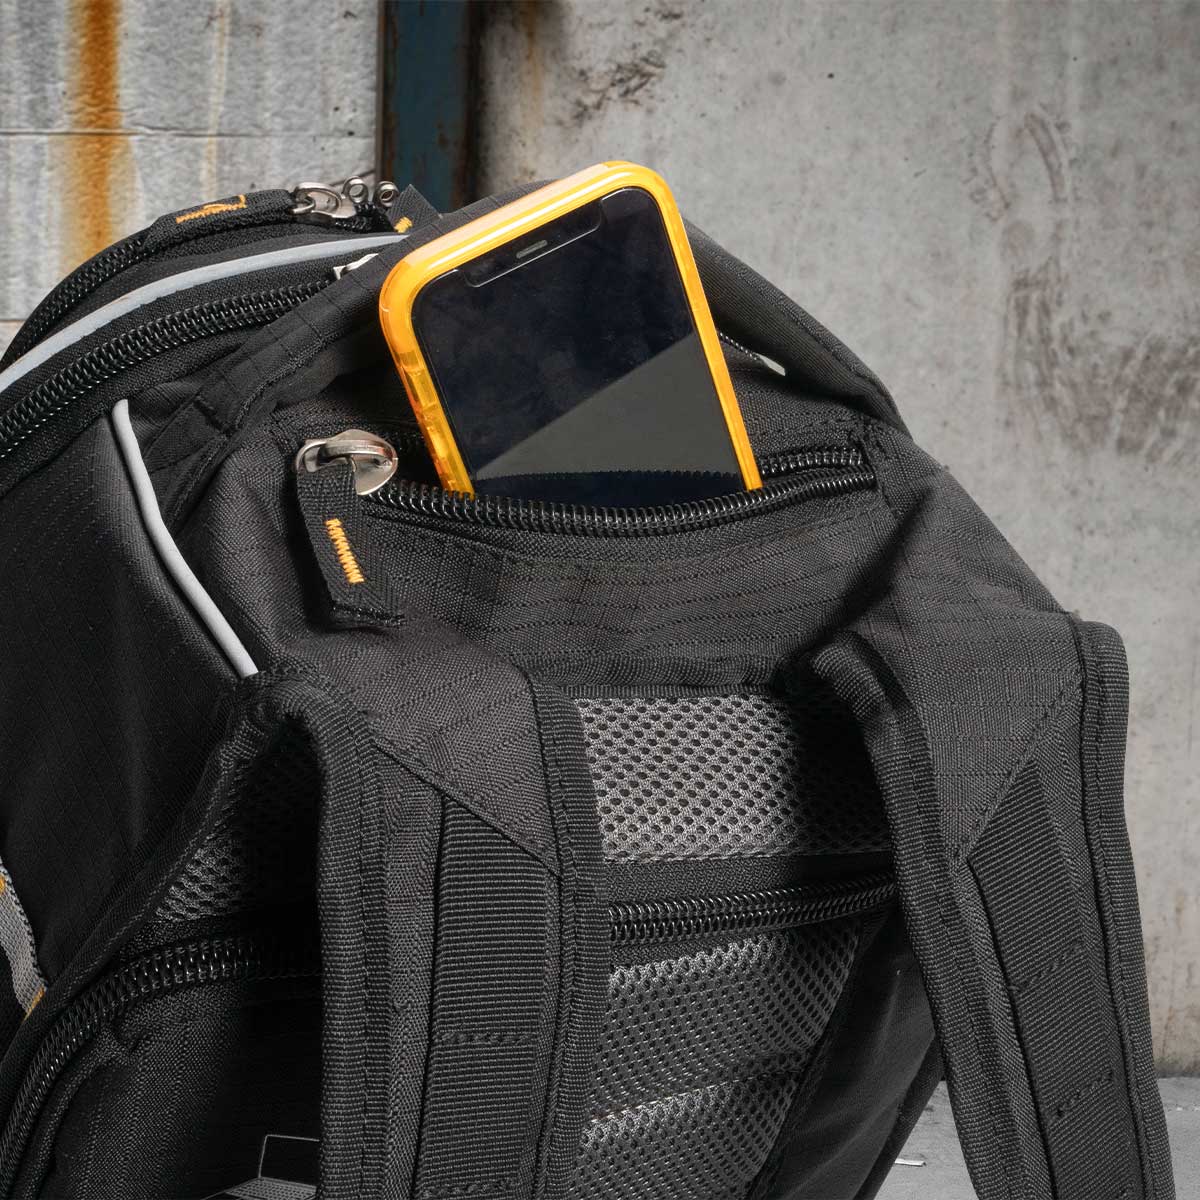 PODconnect Backpack